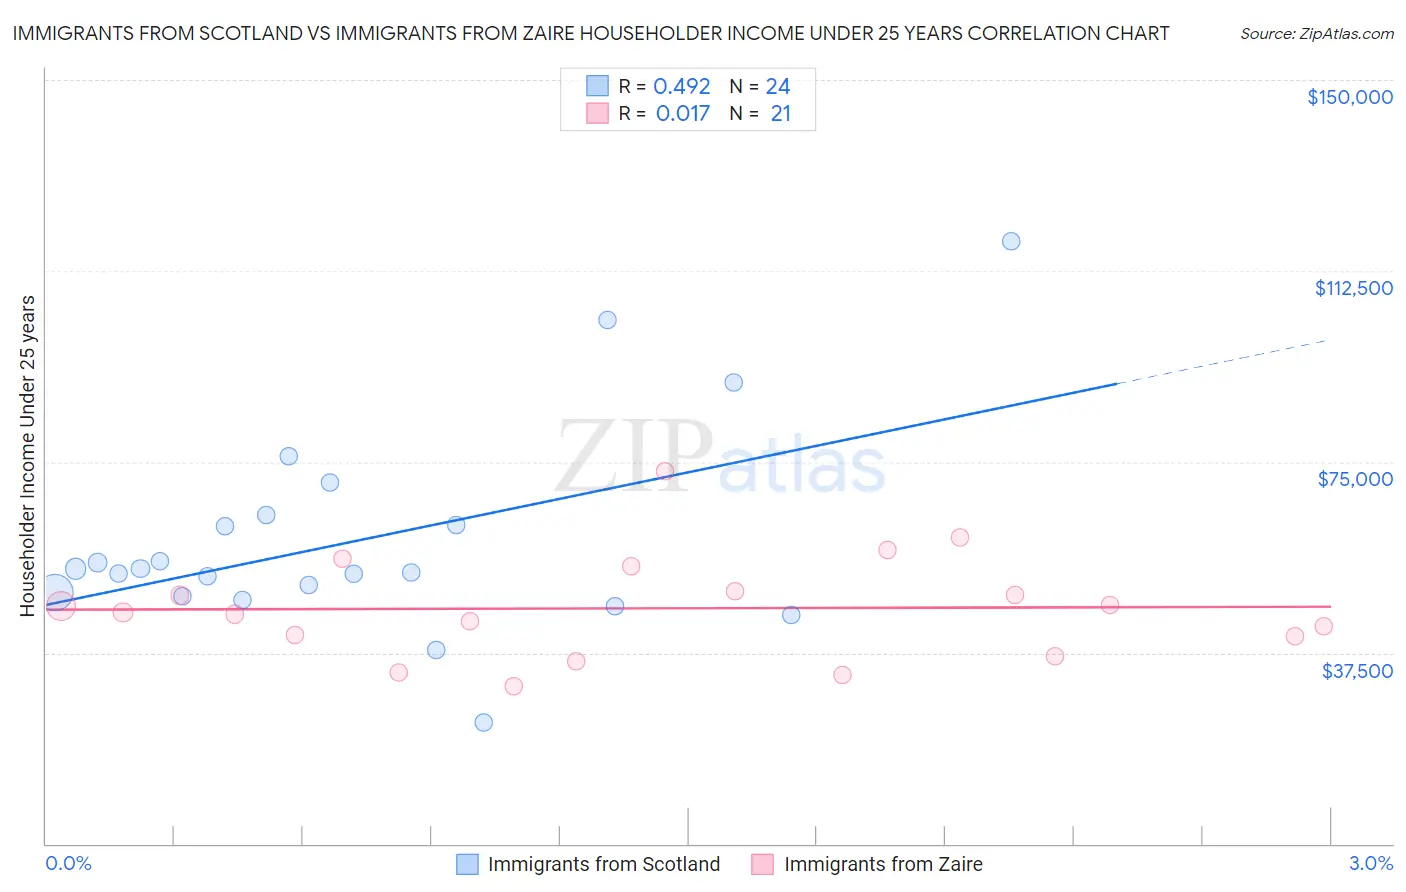 Immigrants from Scotland vs Immigrants from Zaire Householder Income Under 25 years